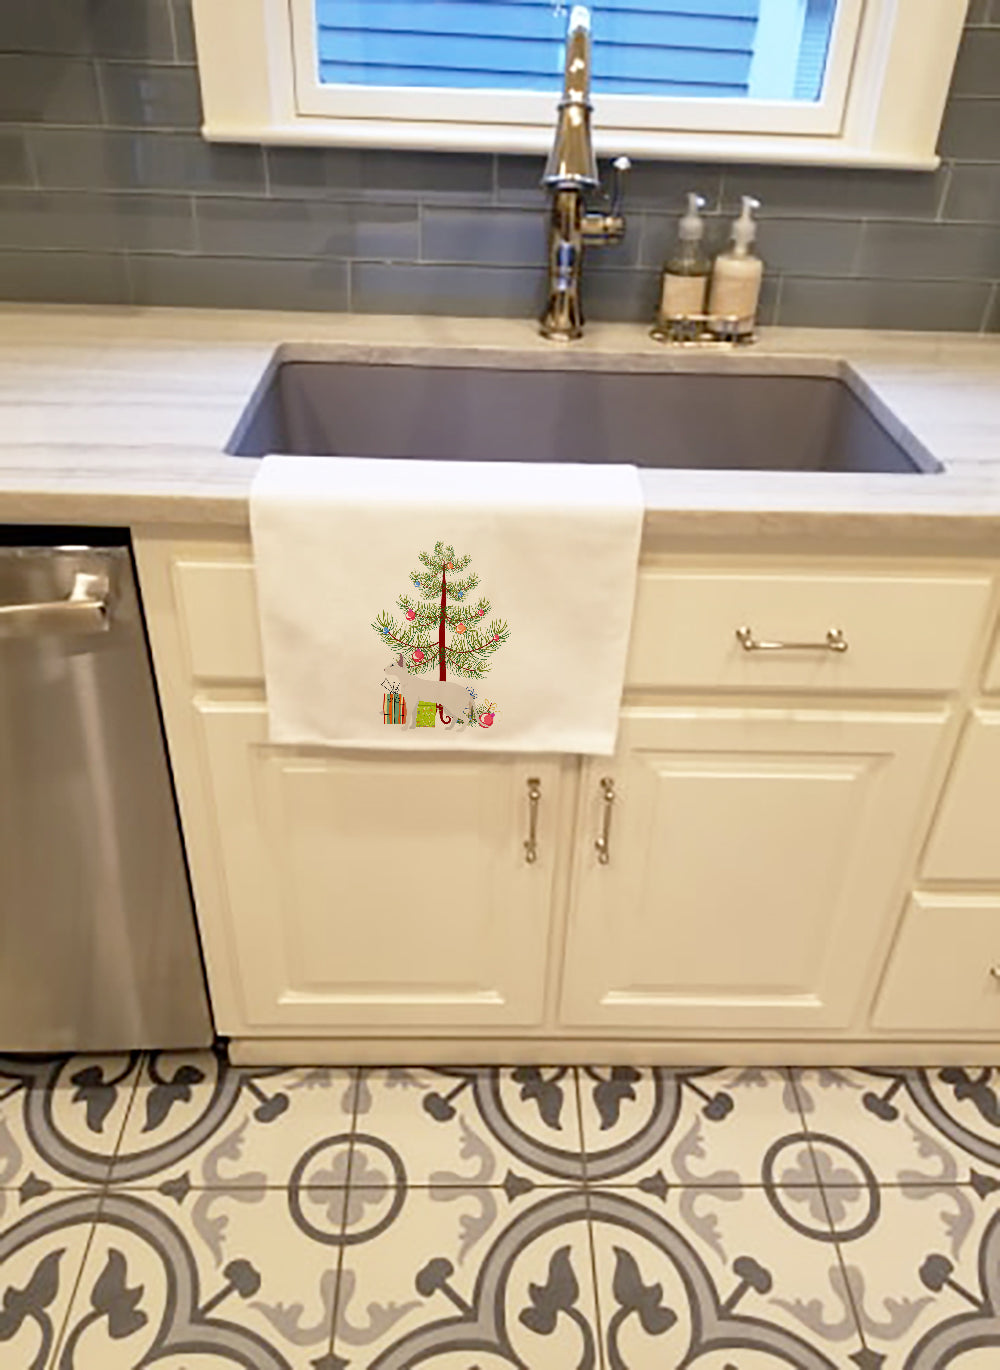 Buy this Peterbald #2 Cat Merry Christmas White Kitchen Towel Set of 2